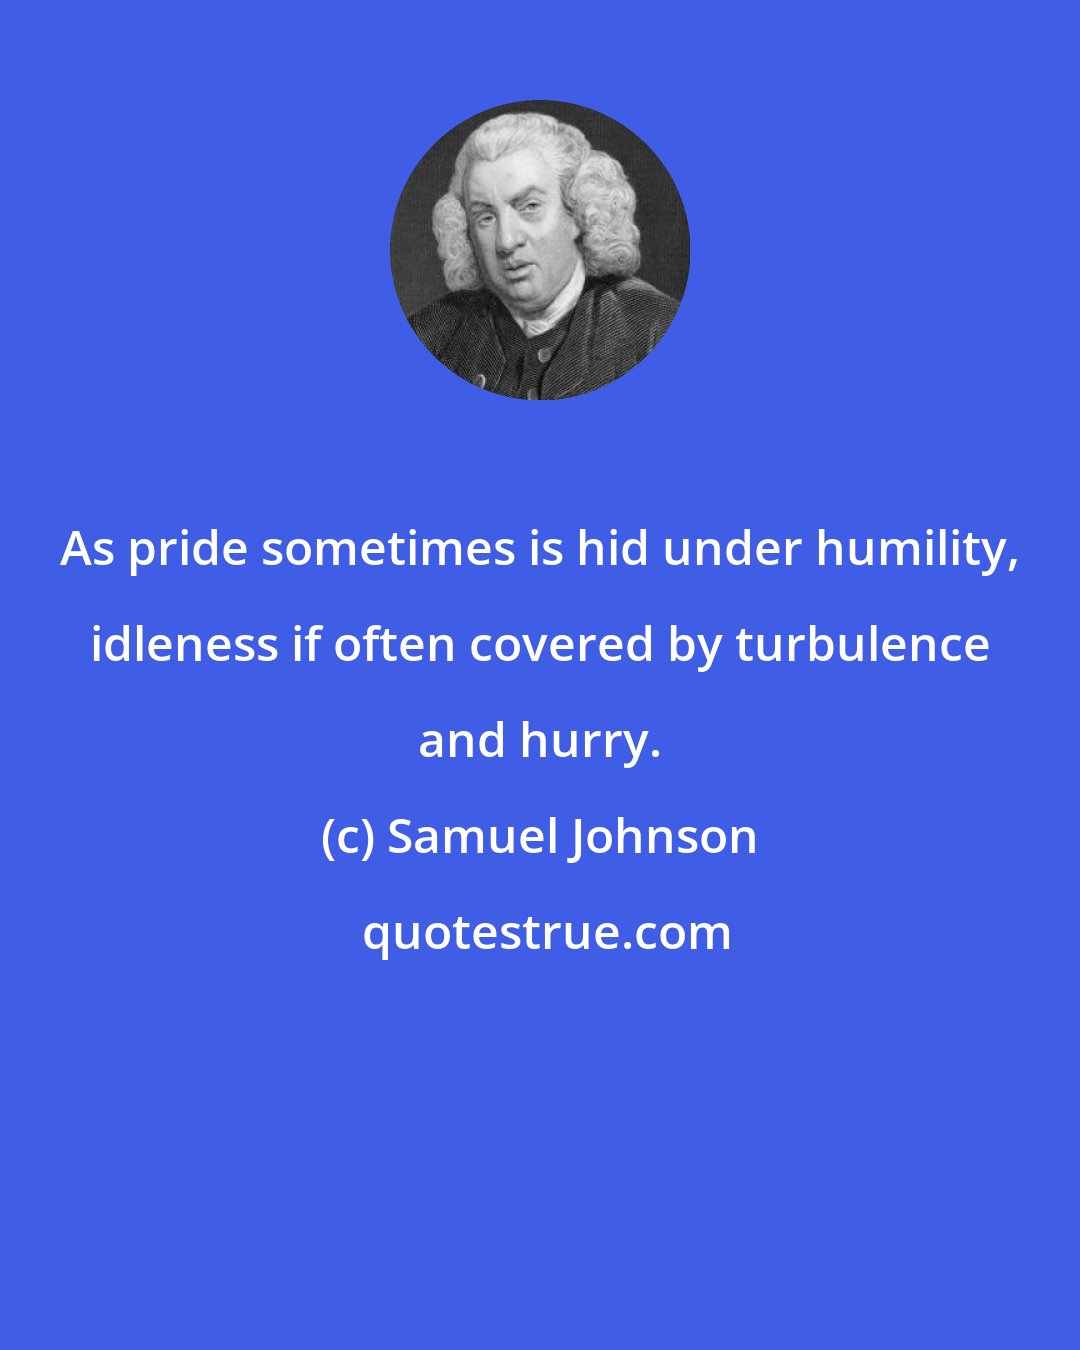 Samuel Johnson: As pride sometimes is hid under humility, idleness if often covered by turbulence and hurry.